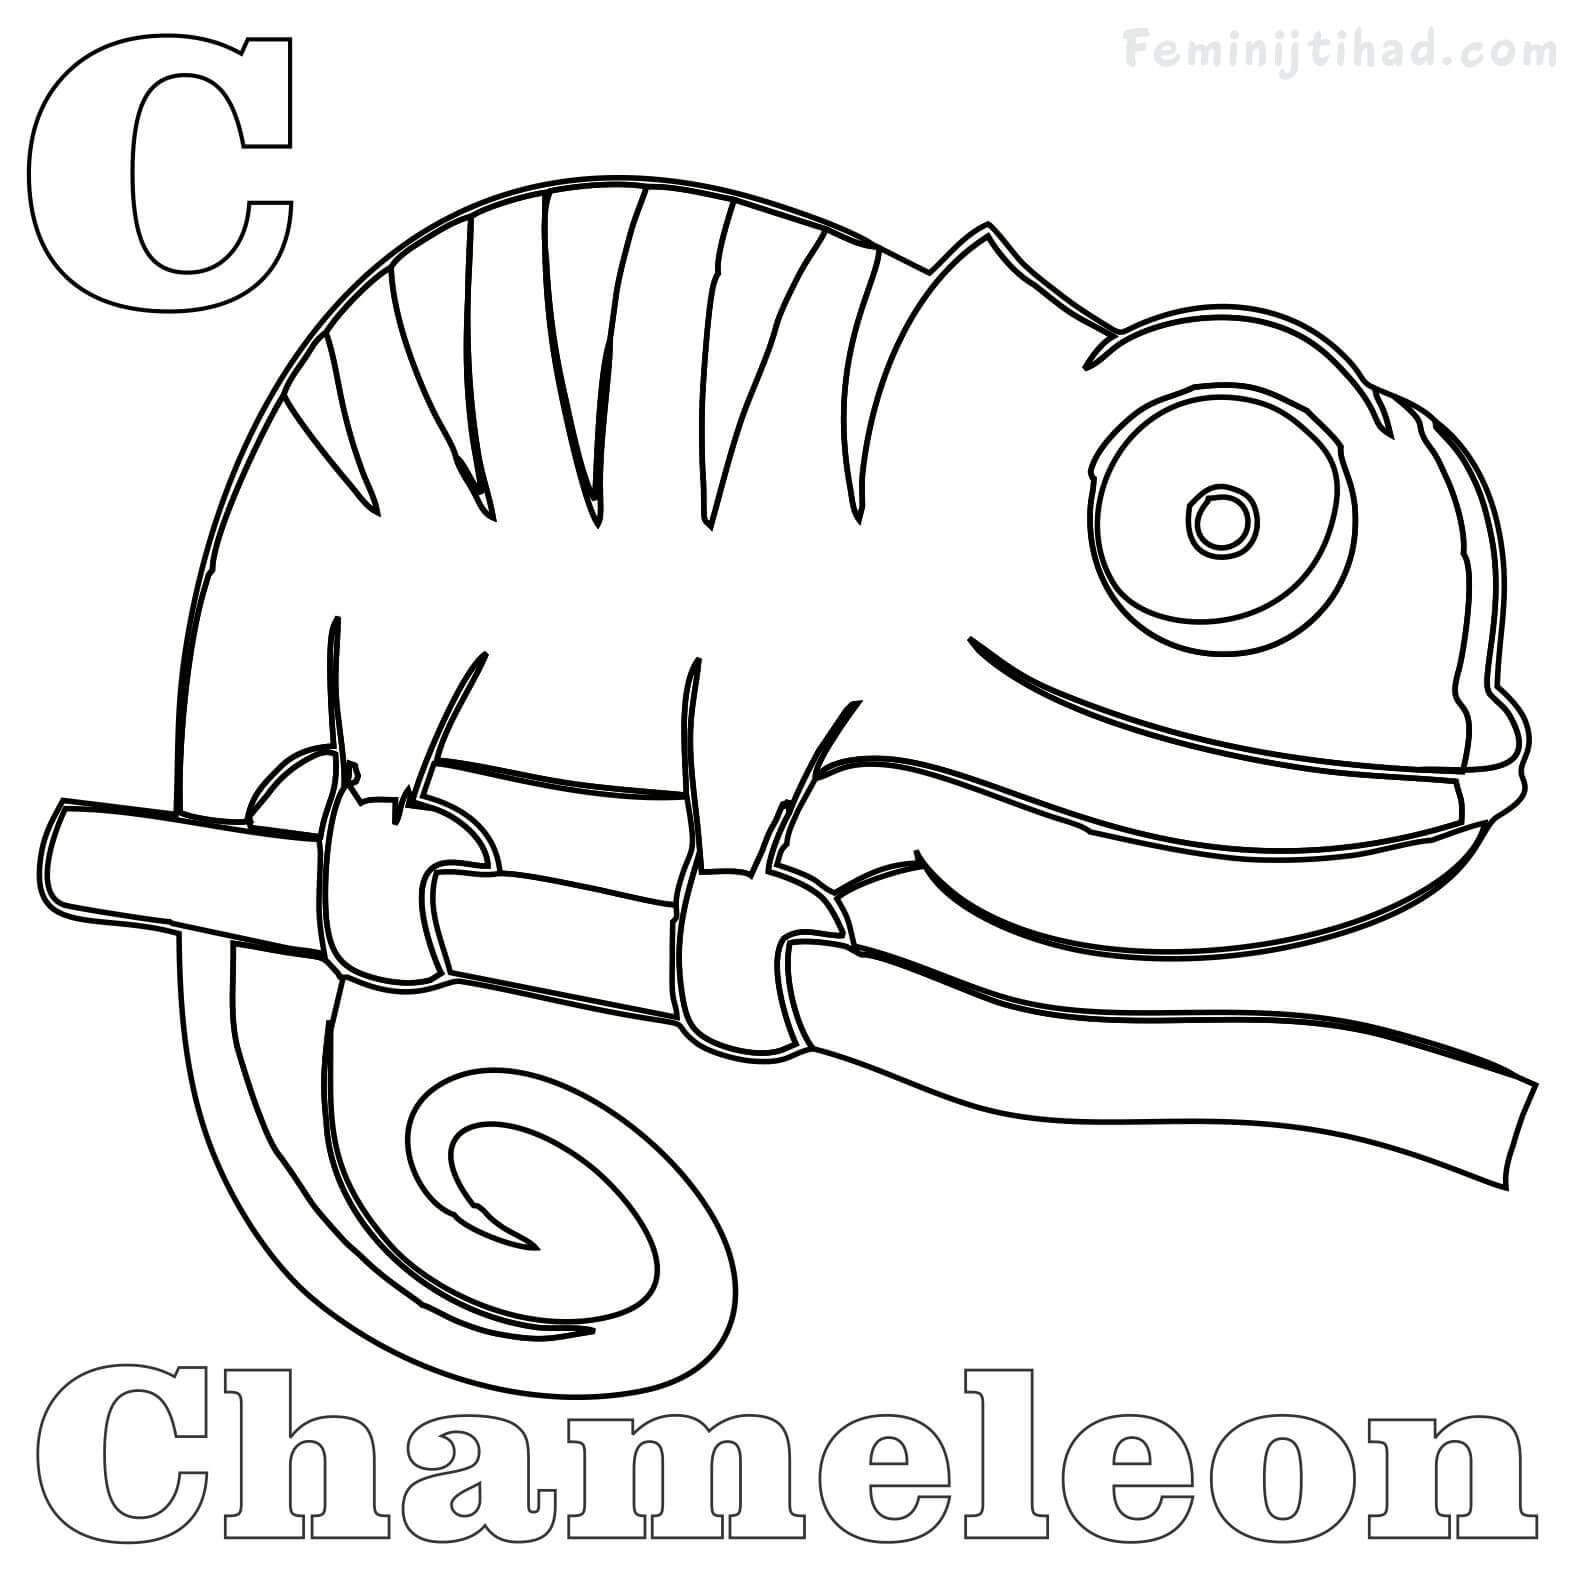 chameleon coloring page free